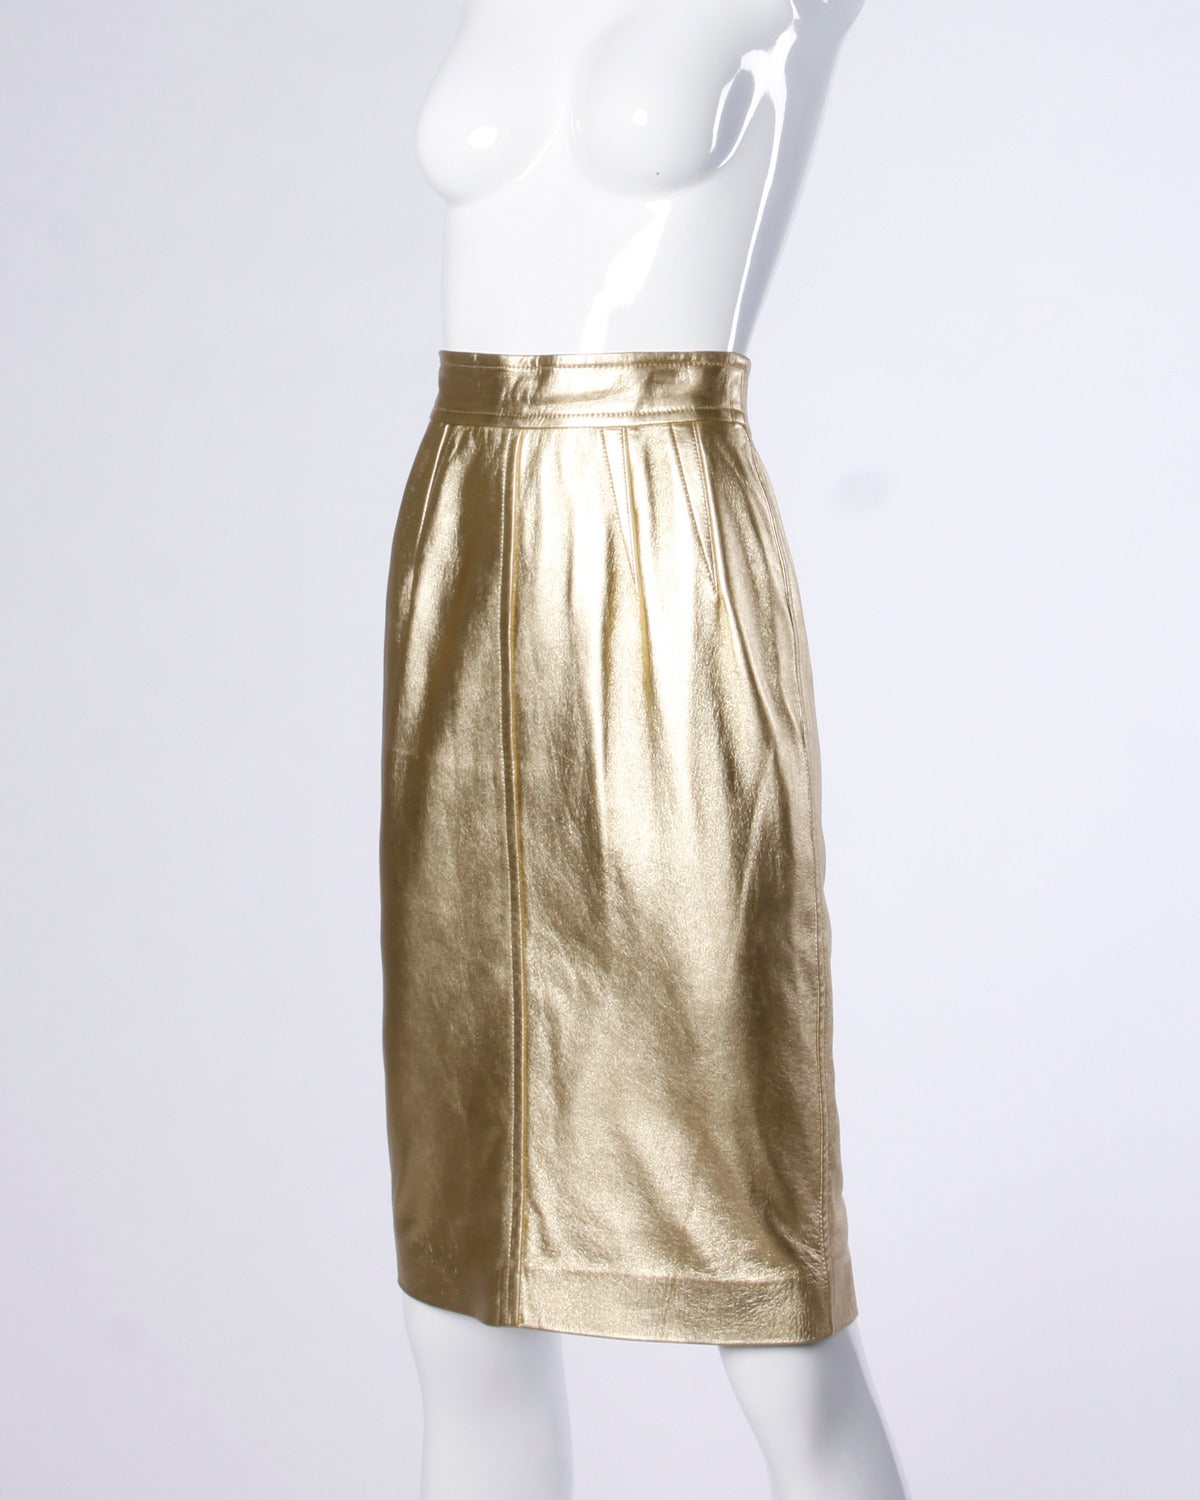 Gorgeous vintage metallic gold leather pencil skirt by Escada!

Details:

Fully Lined
Back Zip and Snap Closure
Marked Size: 34
Color: Gold Metallic
Fabric: Leather/ Rayon
Label: ESCADA

Measurements:

Waist: 26